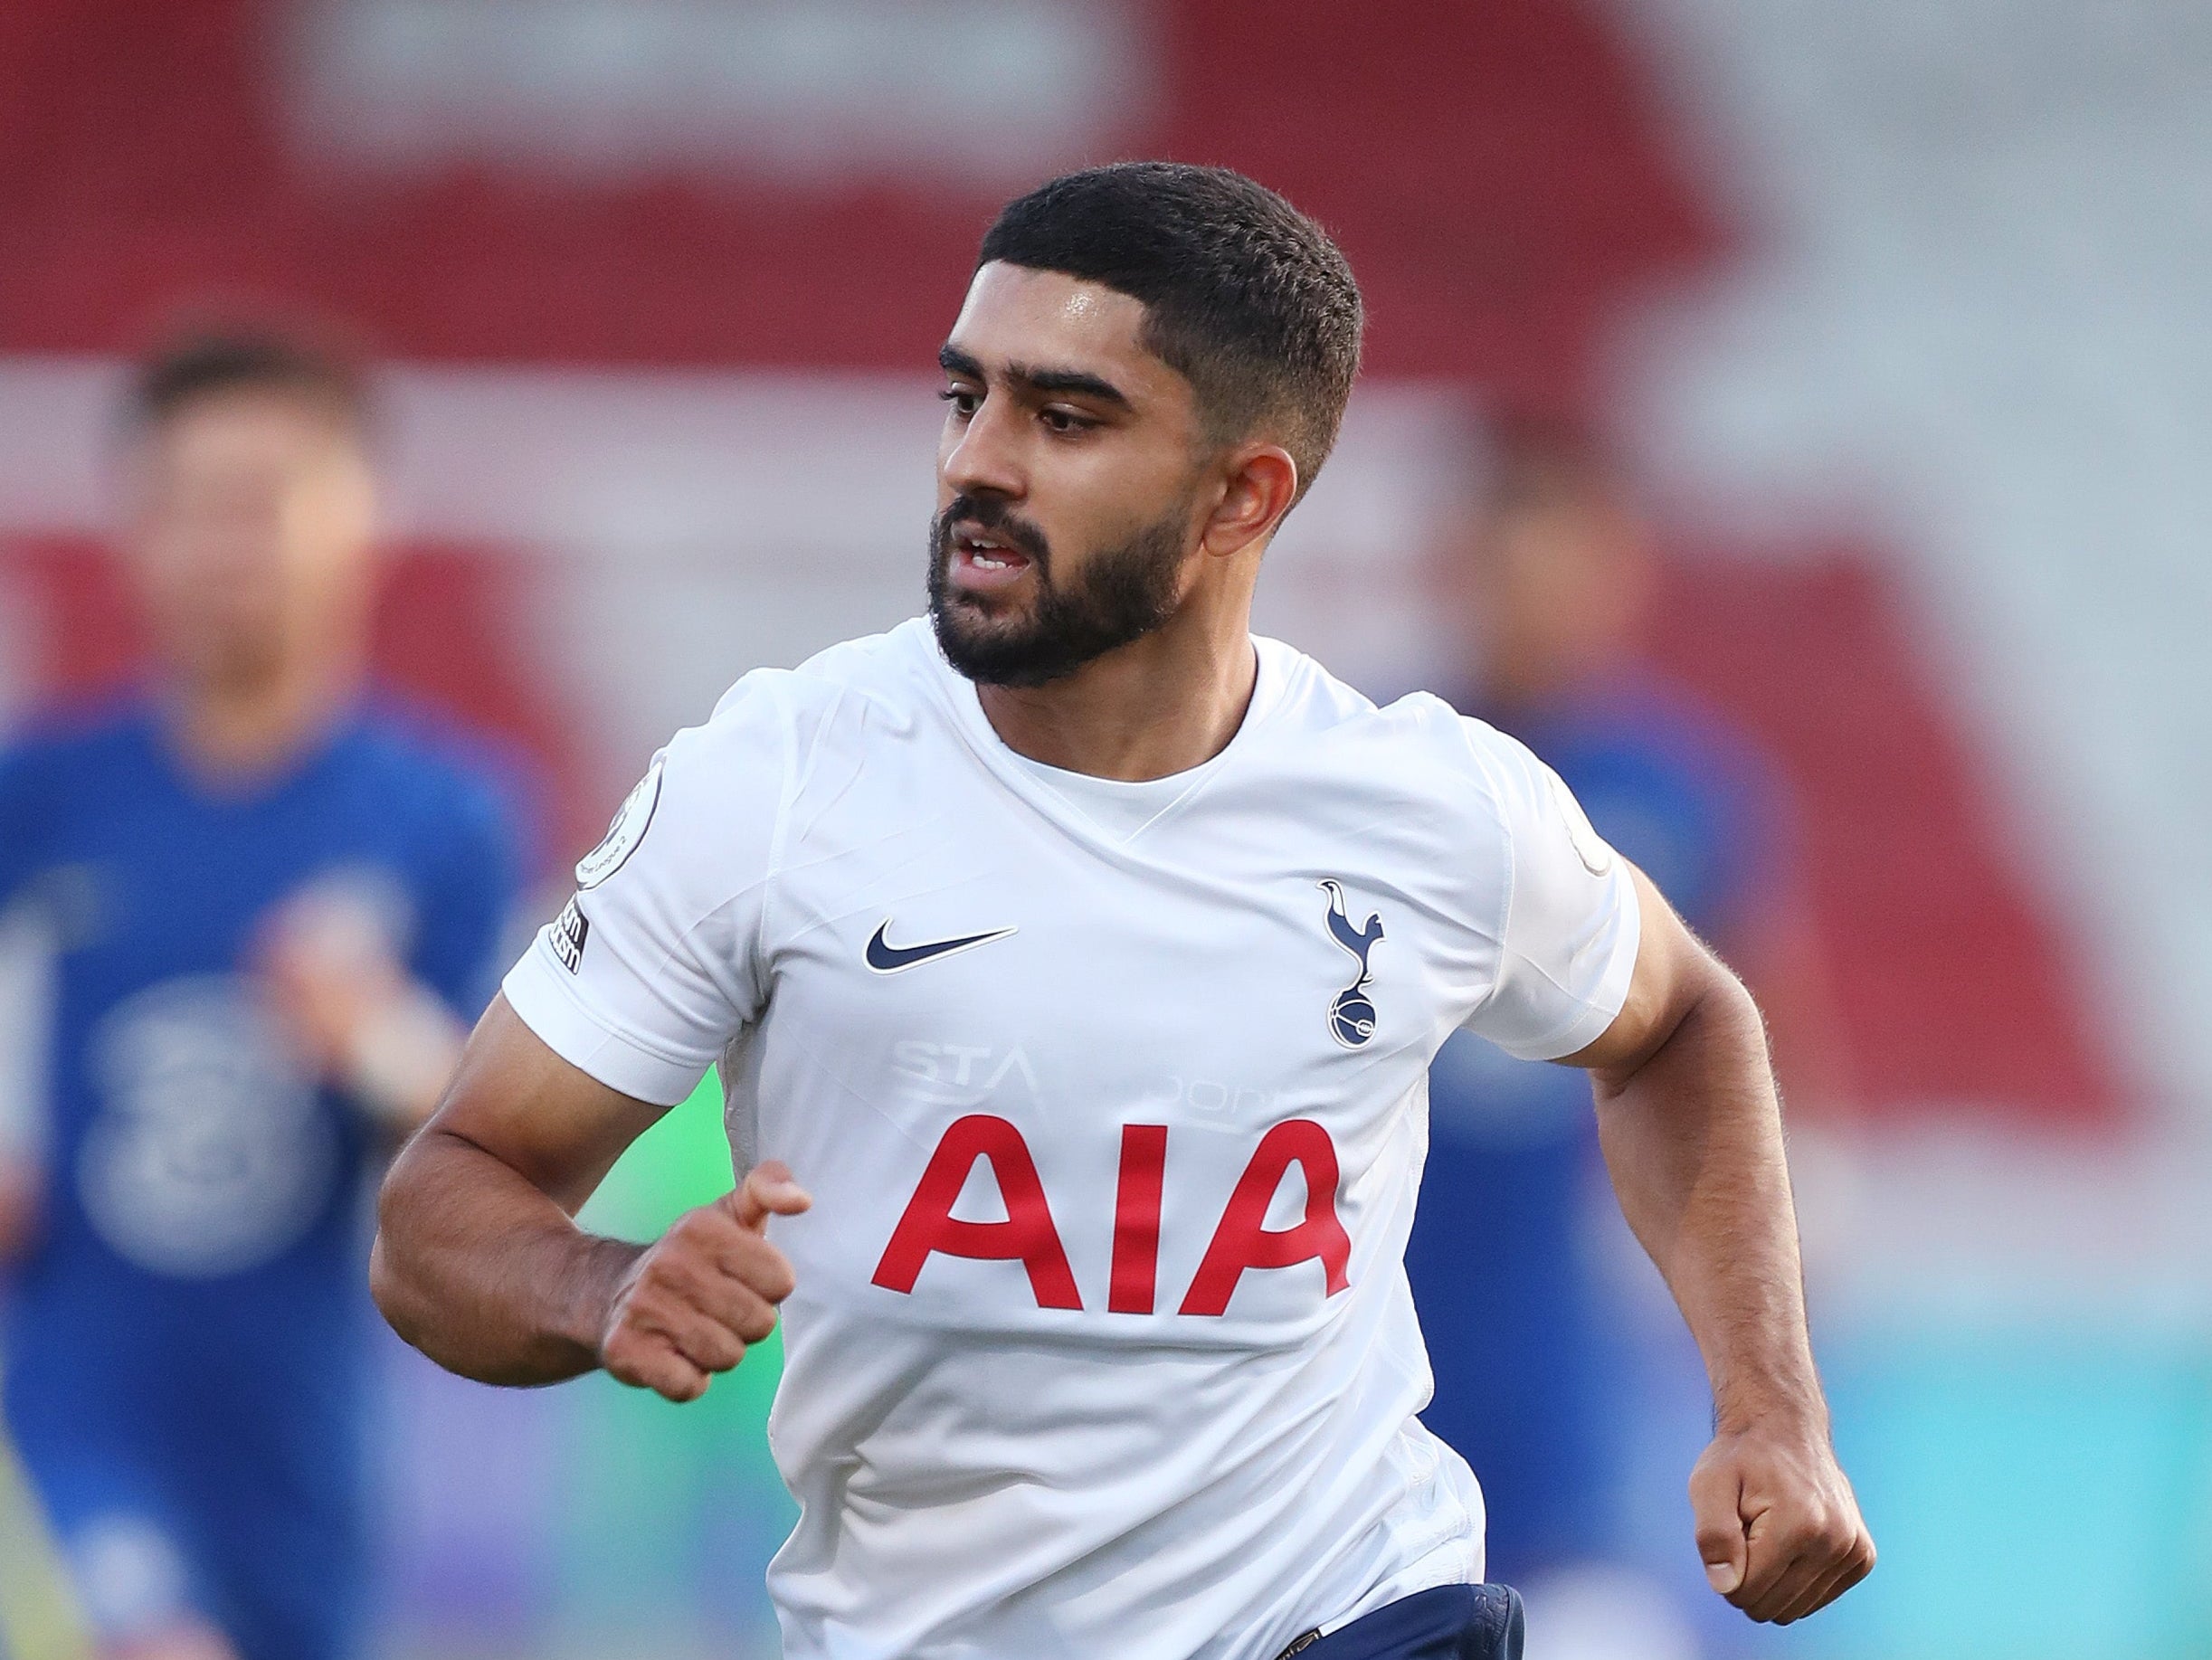 The 20-year-old has become the first British Asian to play a first-team game for the north London club